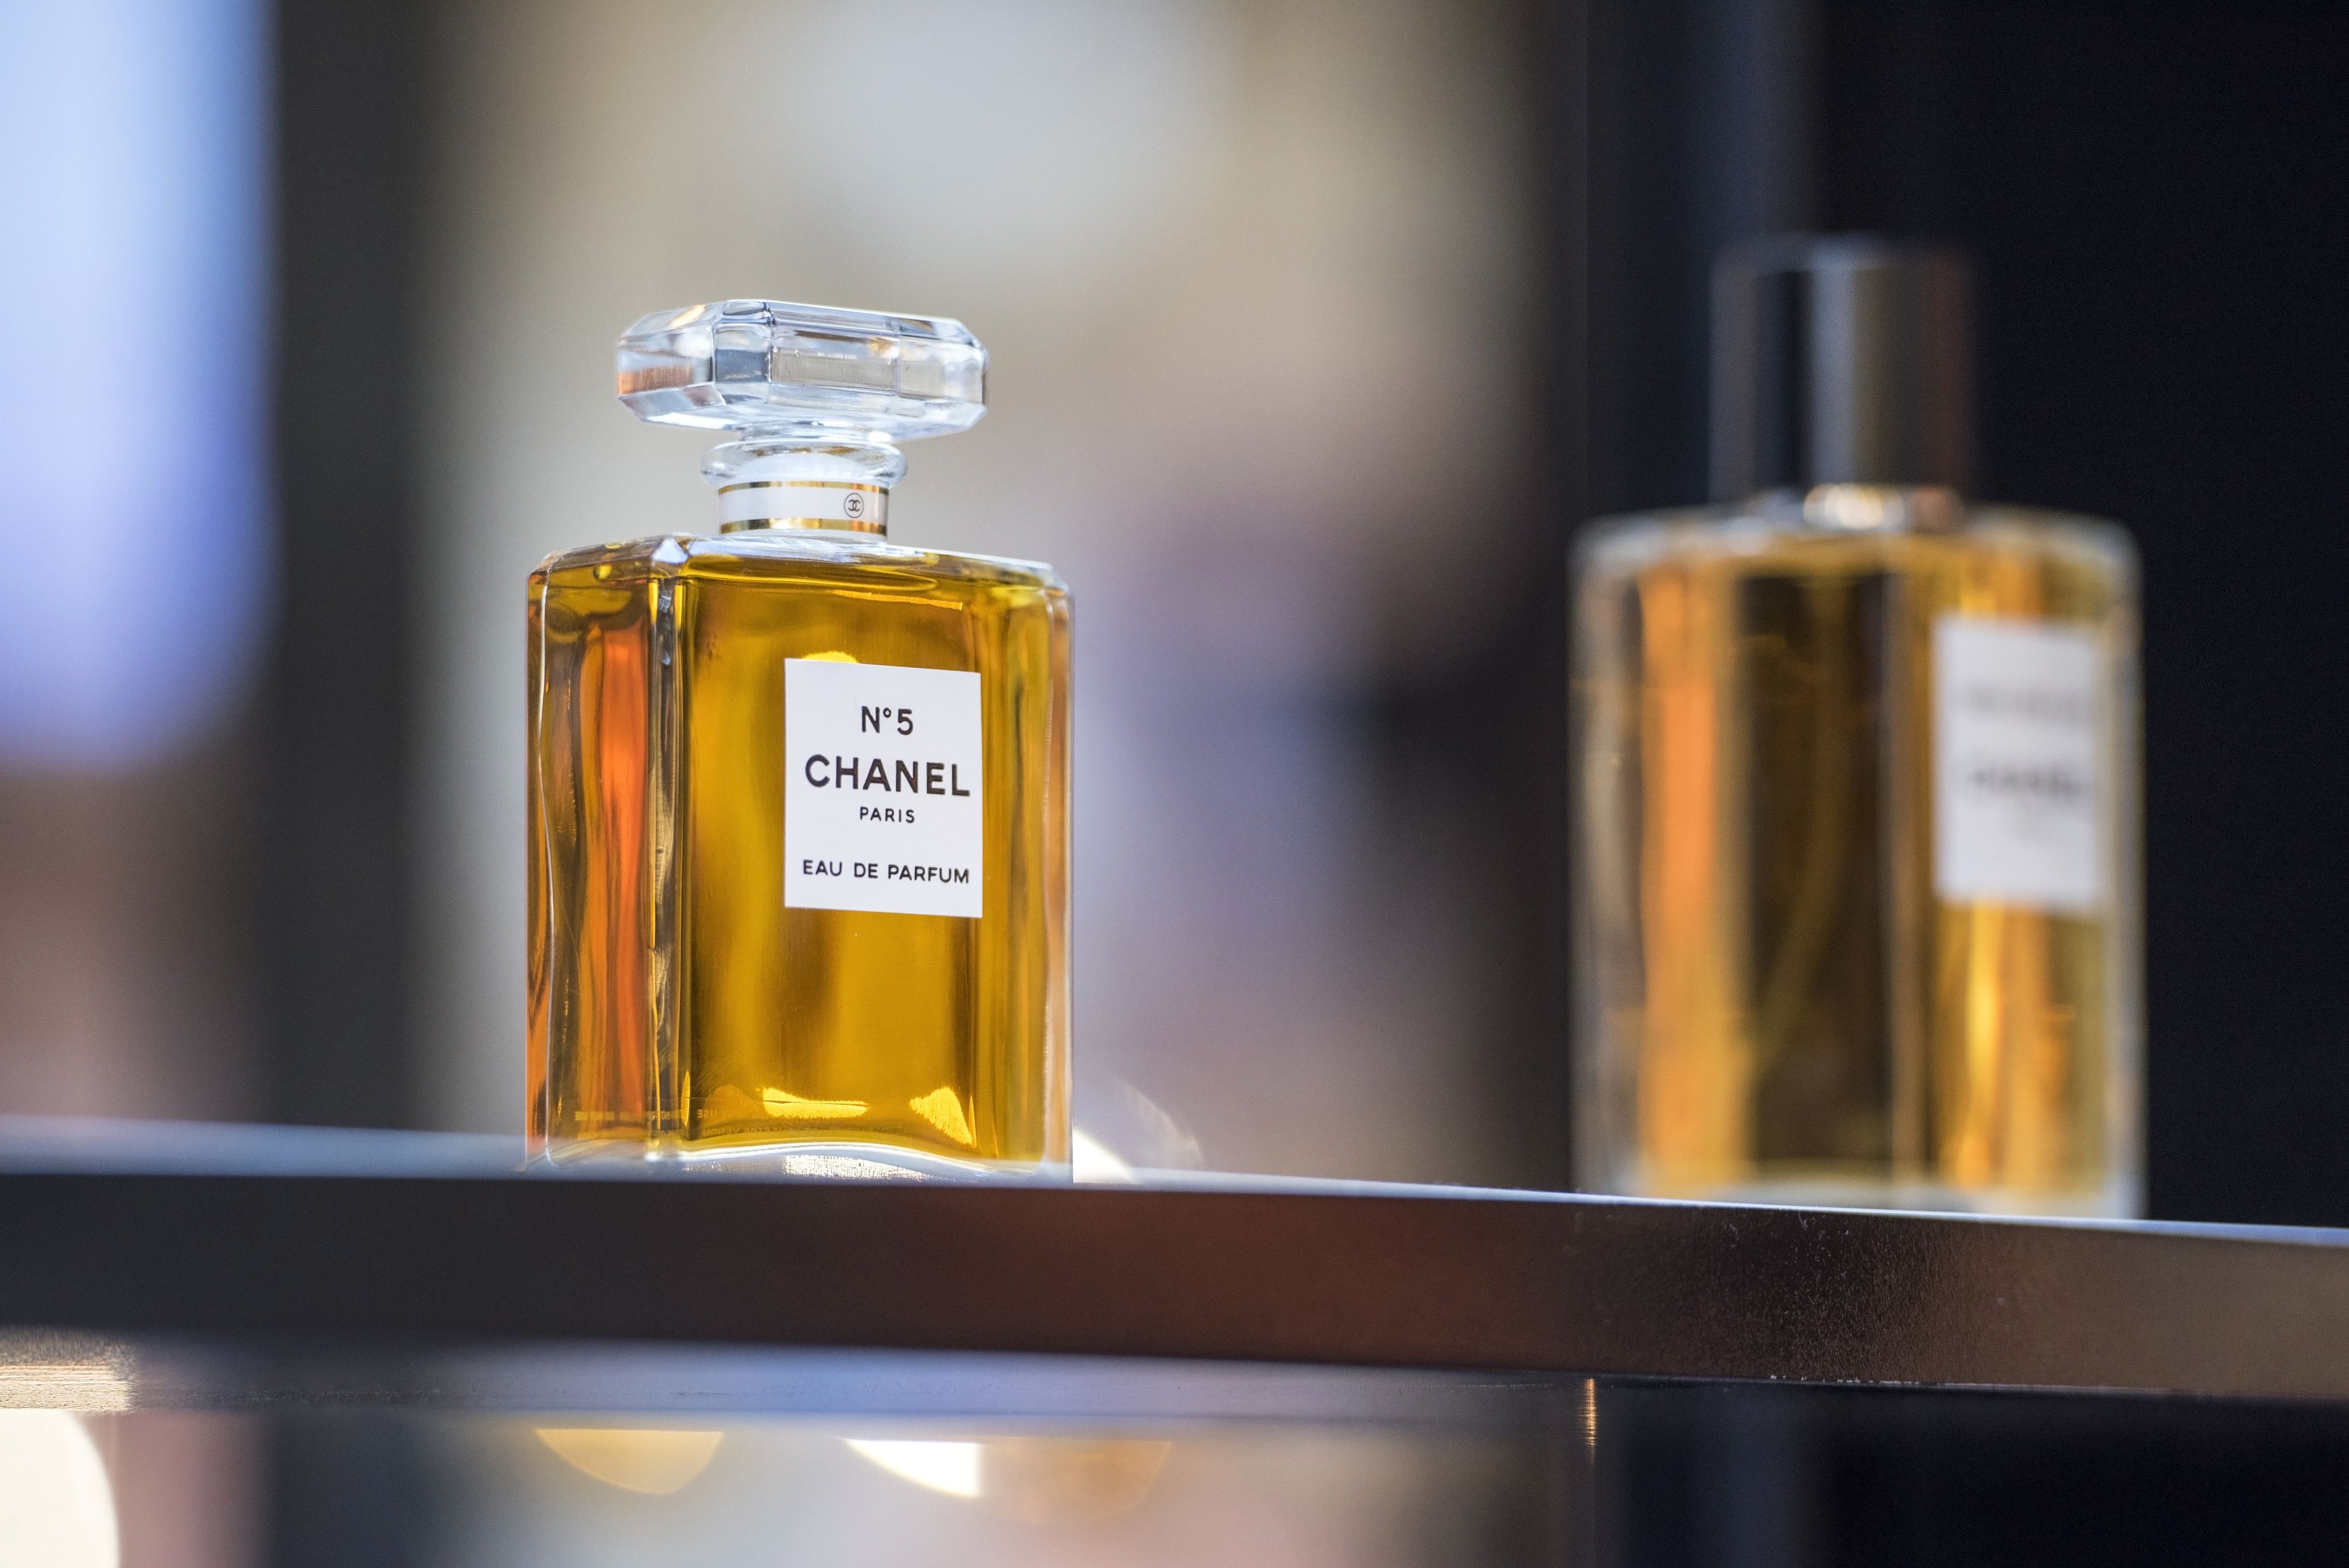 Chanel Buys Up More Jasmine Fields to Safeguard Famous No. 5